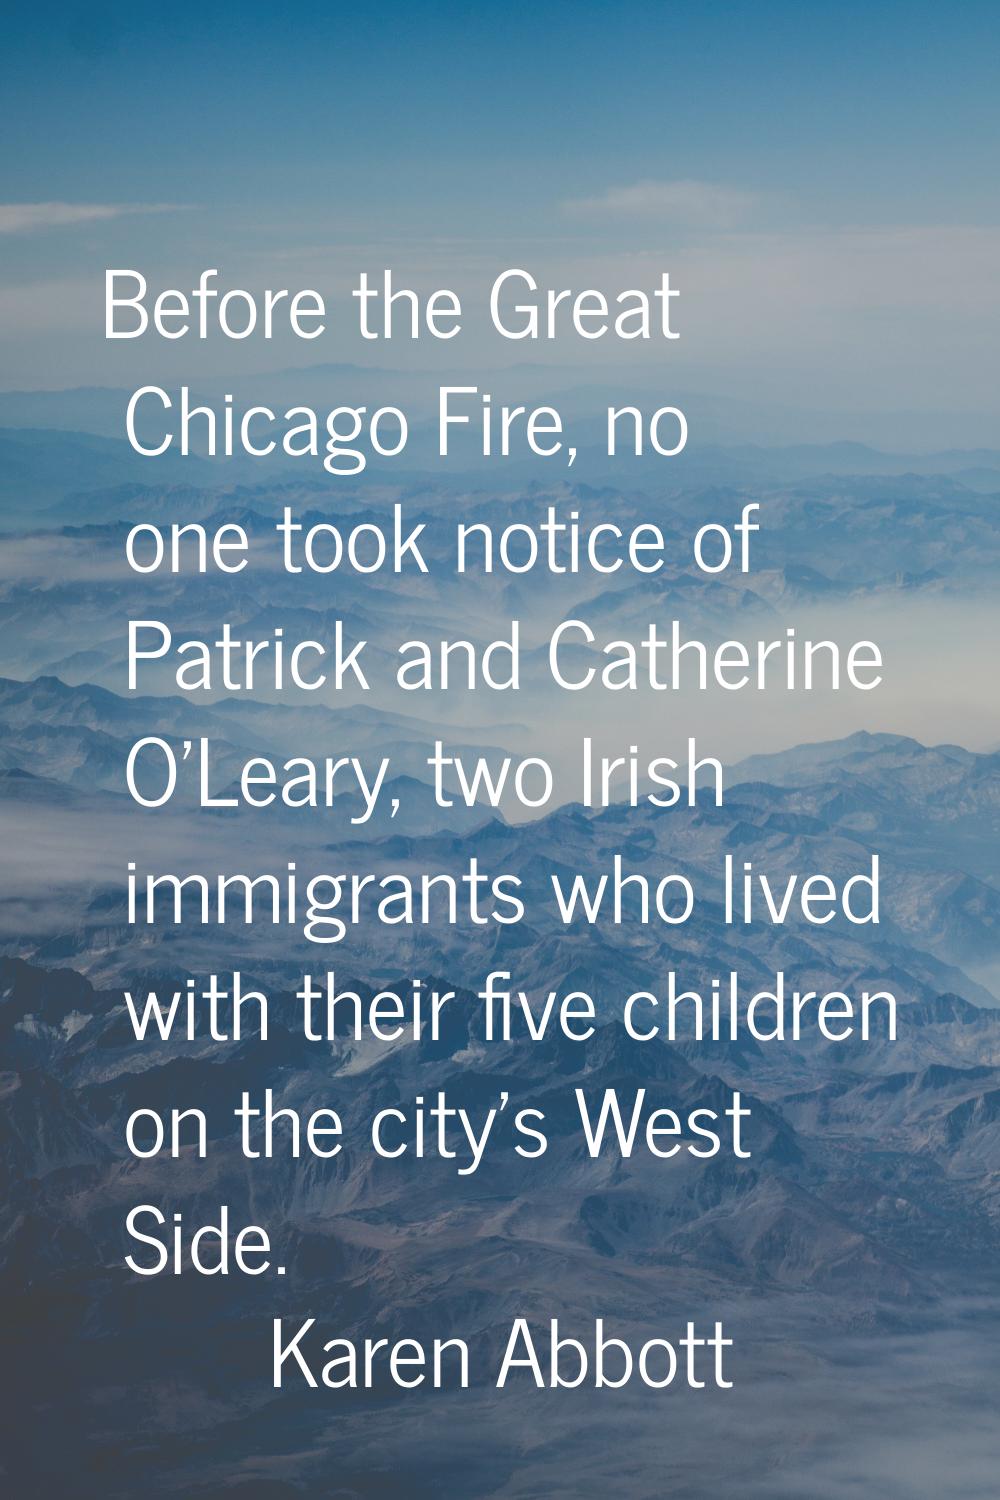 Before the Great Chicago Fire, no one took notice of Patrick and Catherine O'Leary, two Irish immig